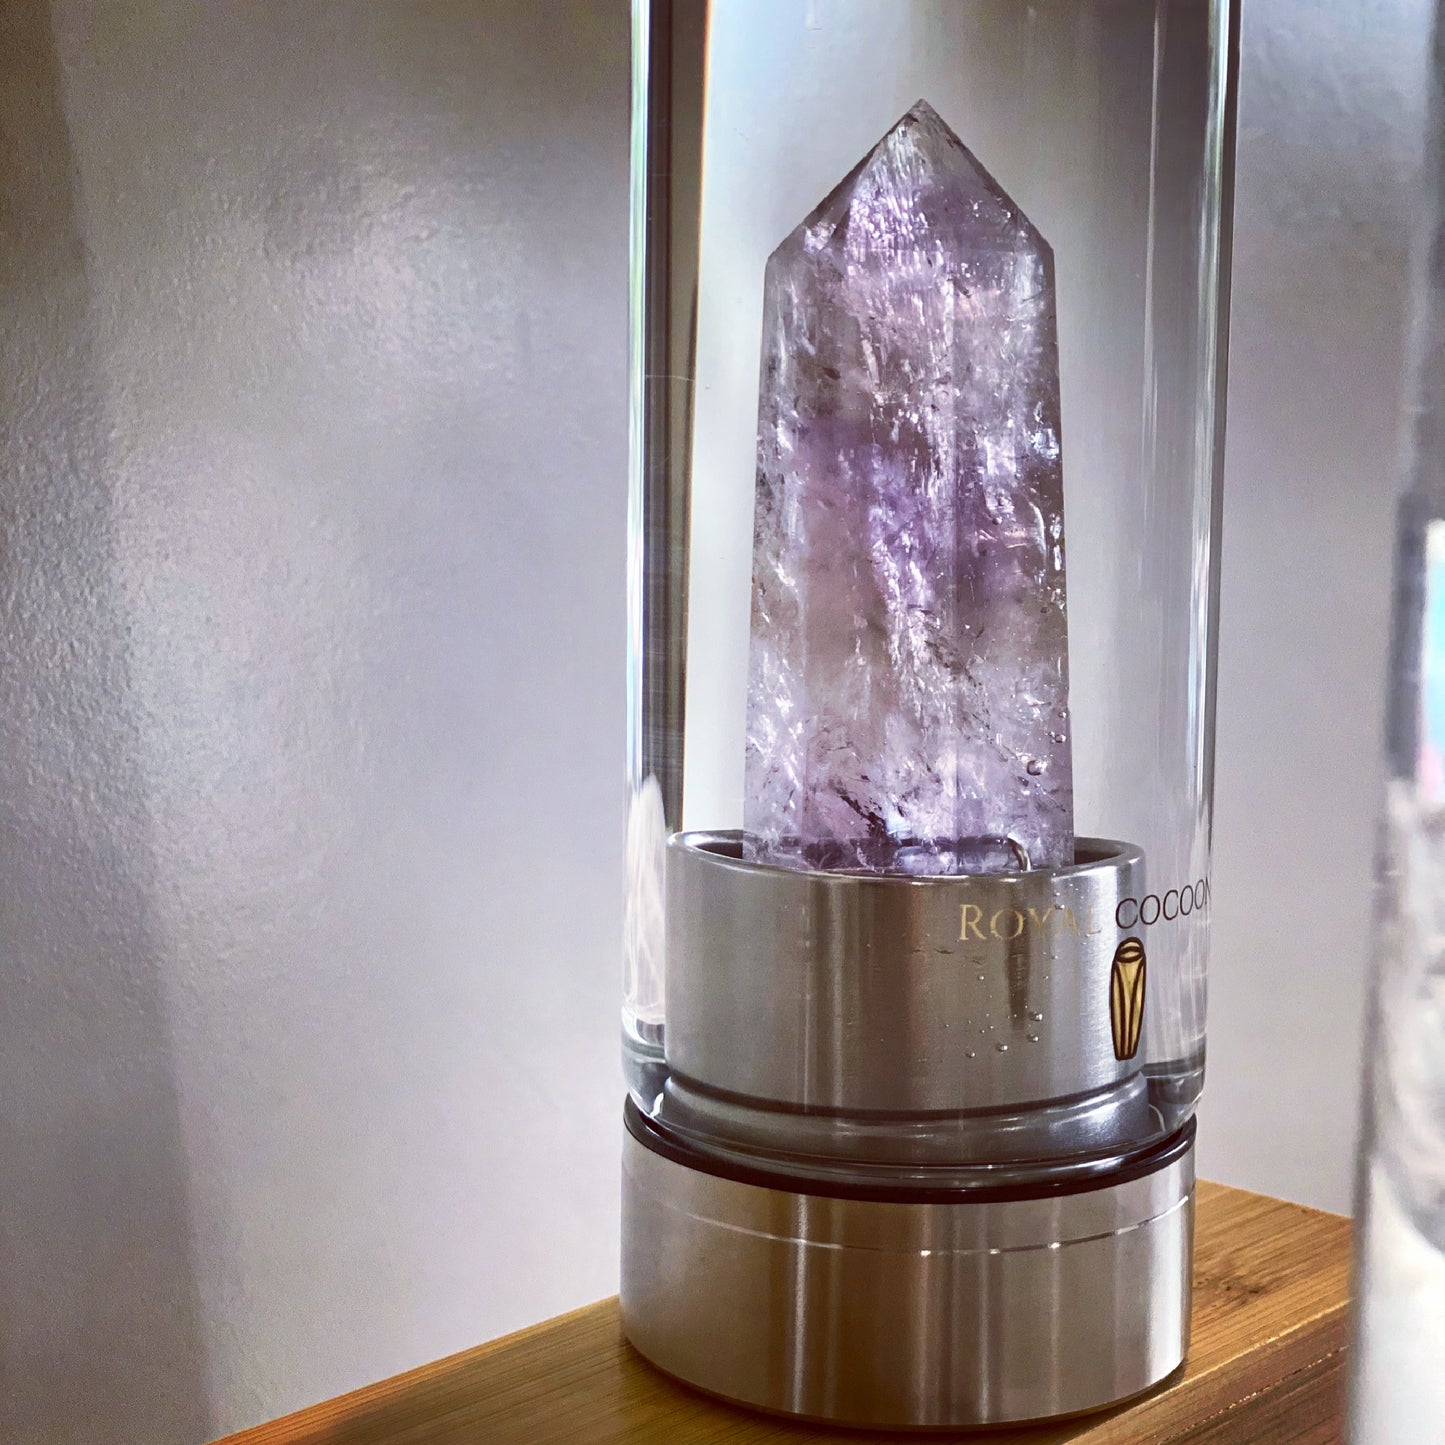 TRANQUILITY ☽ Amethyst Crystal Water Bottle  600ml  | Stainless Steel